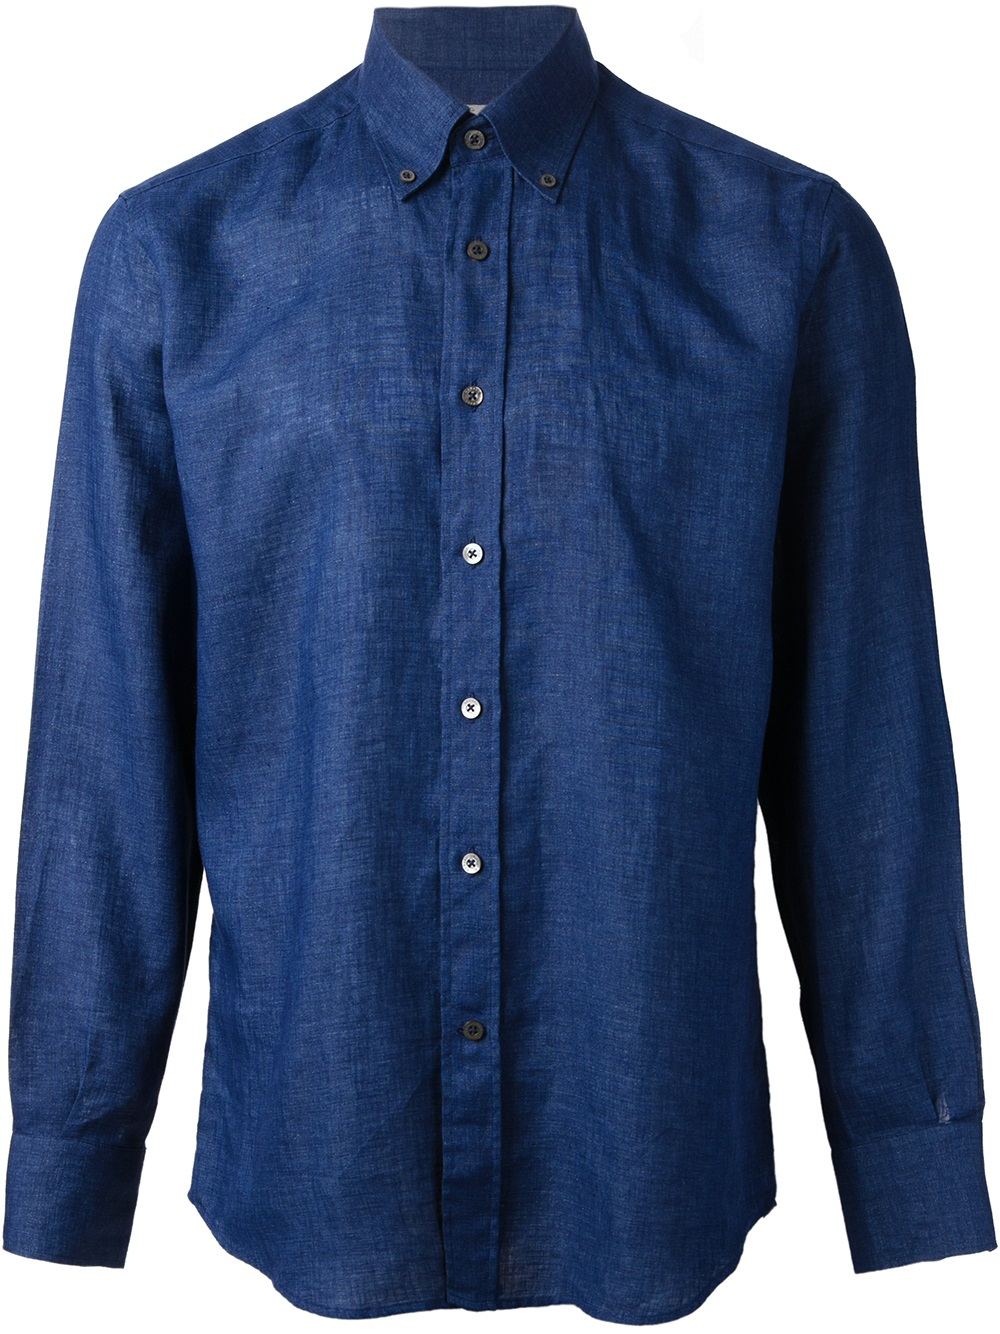 Lyst - Canali Classic Chambray Shirt in Blue for Men